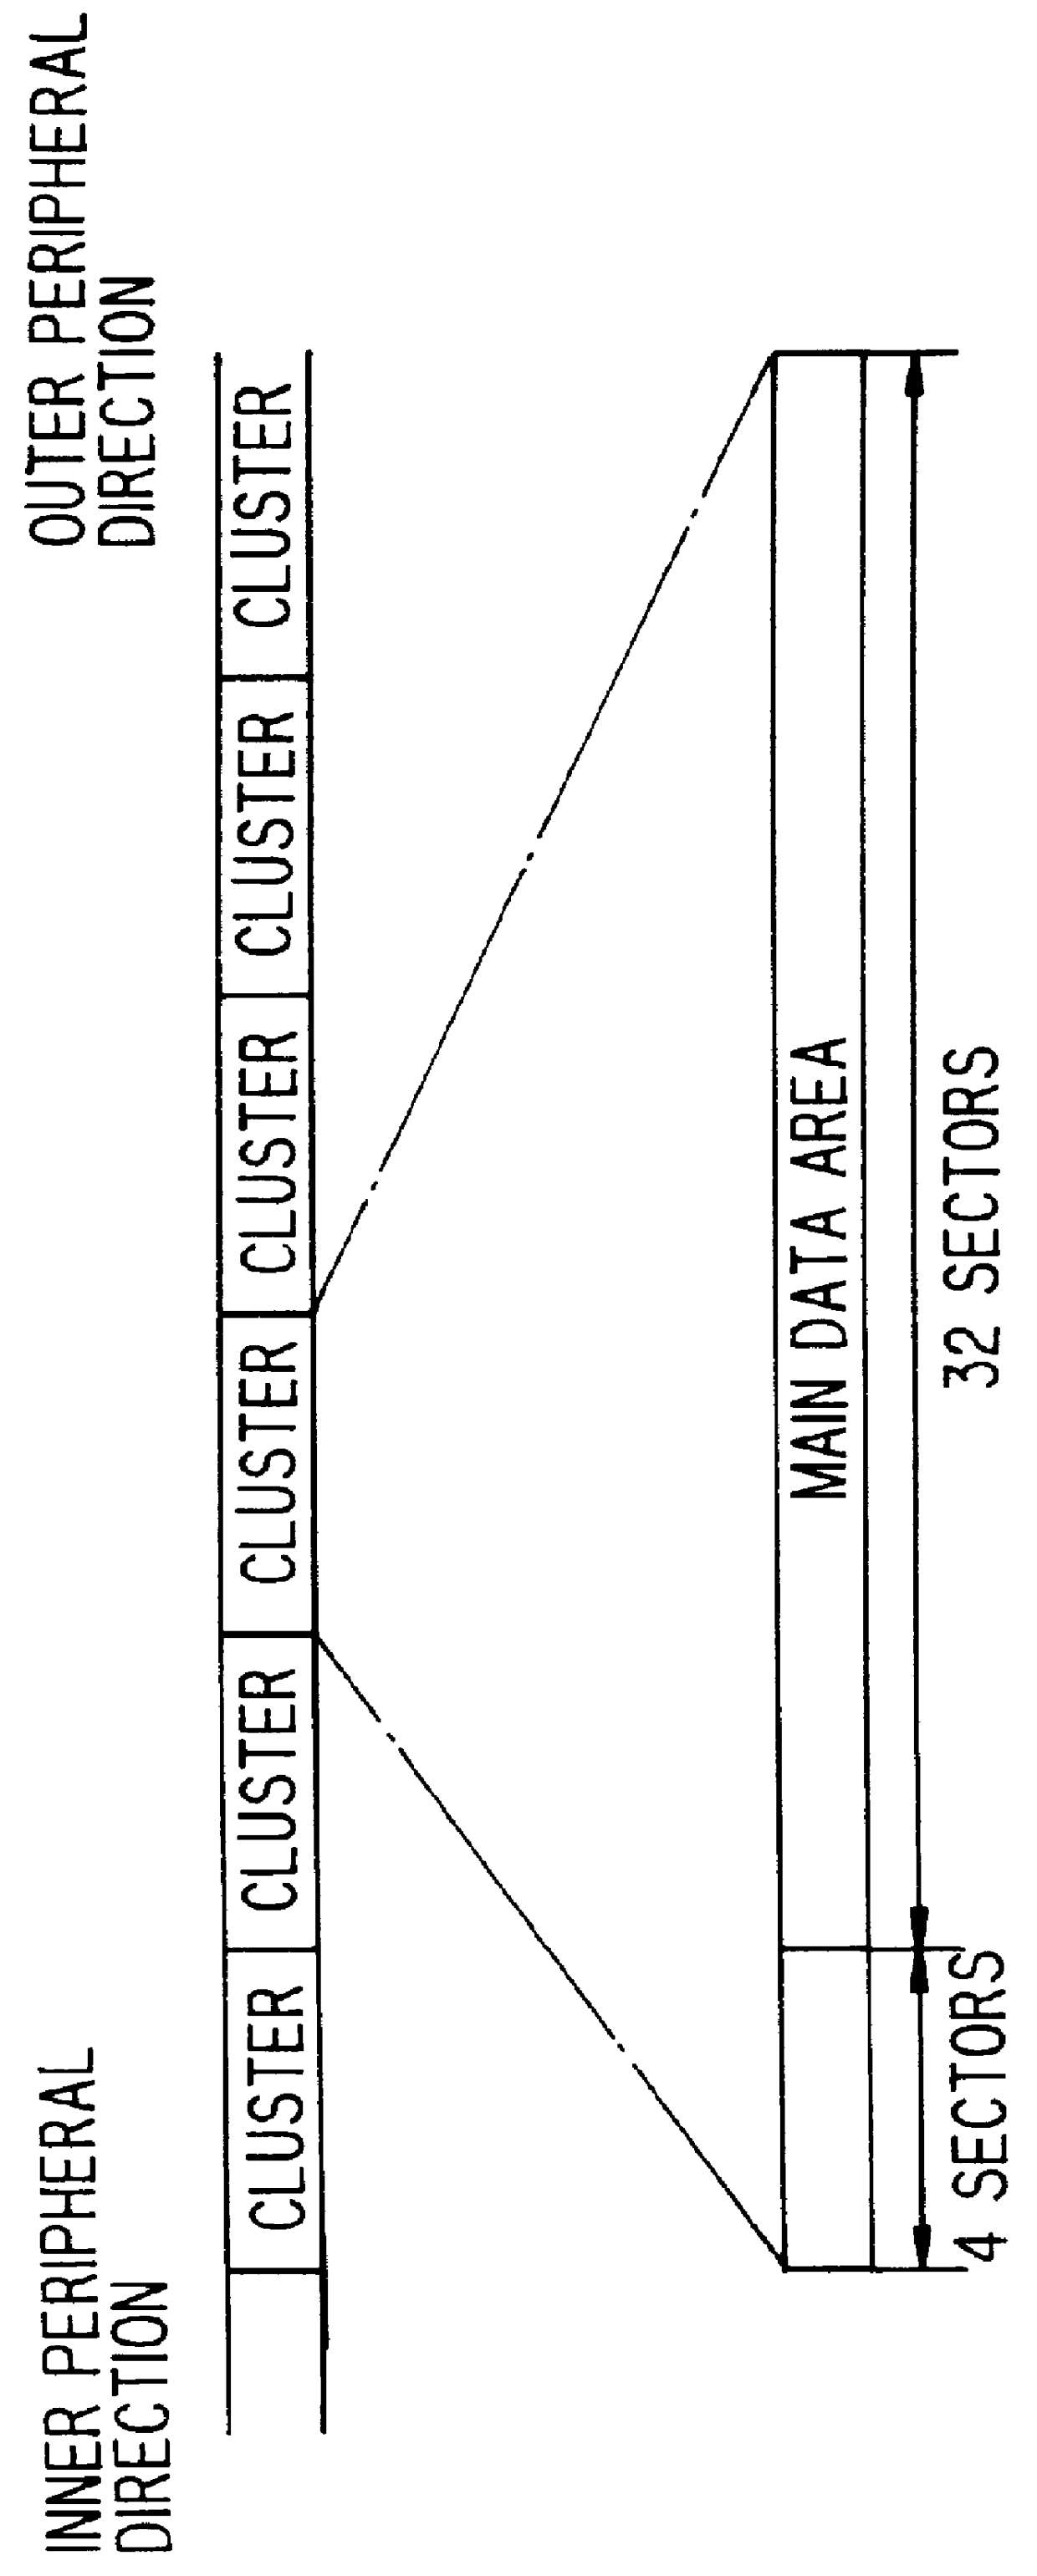 Methods and apparatus for recording data on and deleting already recorded data from a recording medium